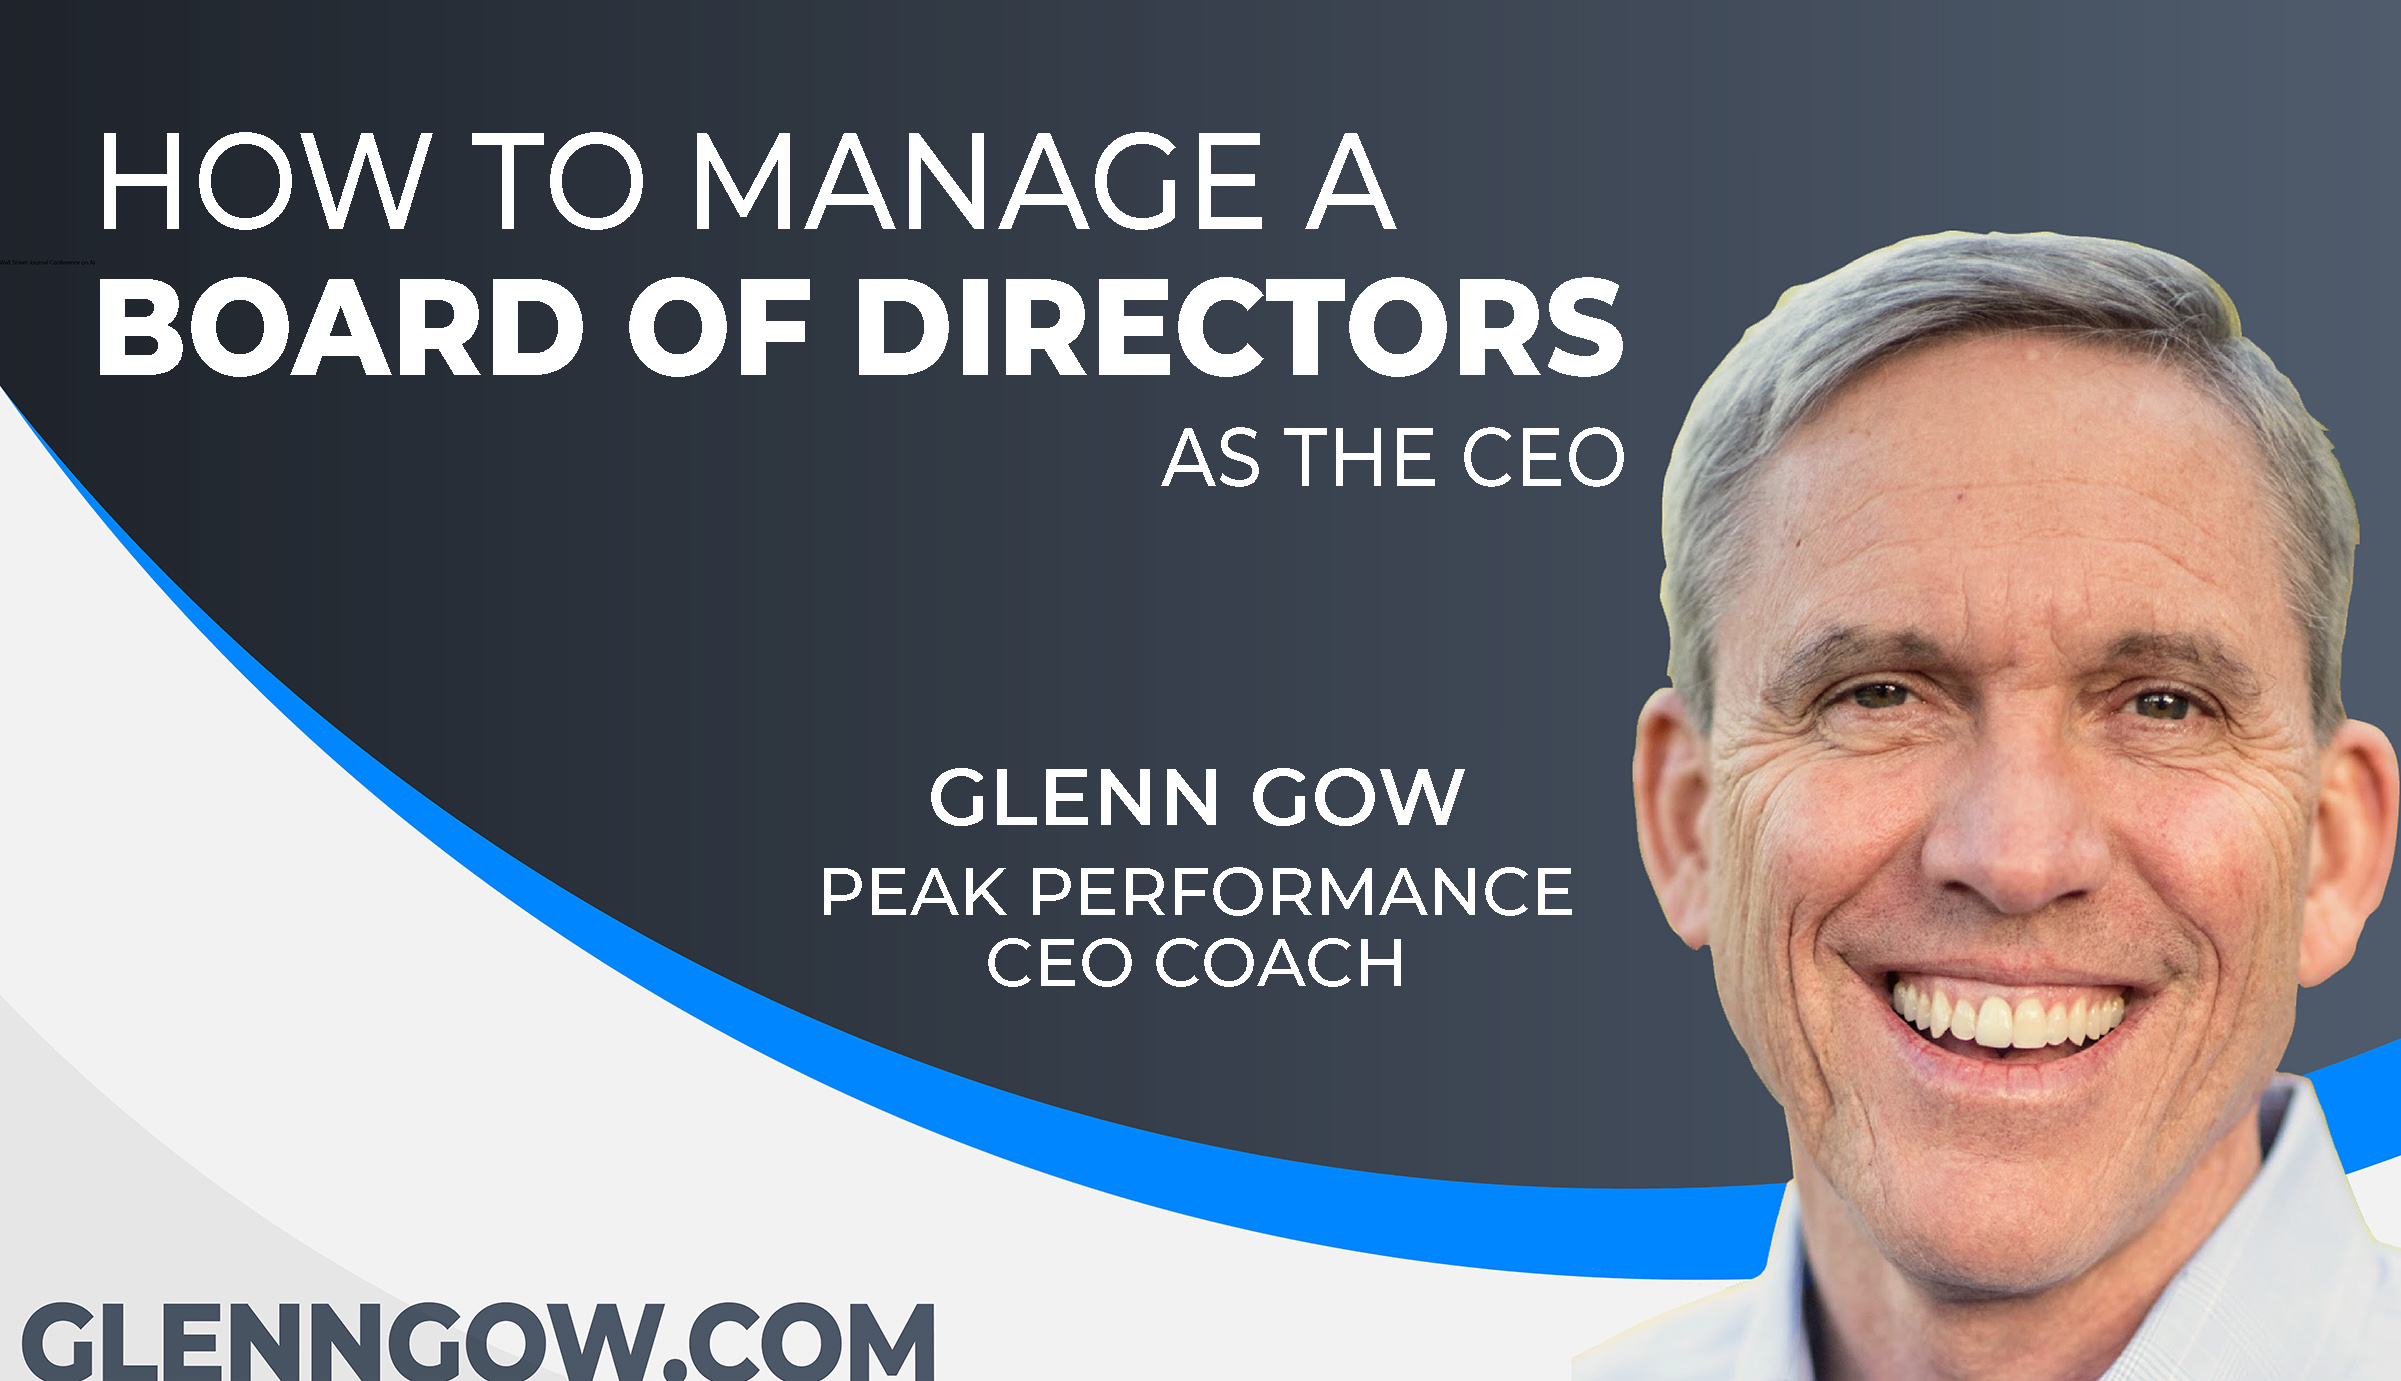 How to manage your board of directors as CEO image banner